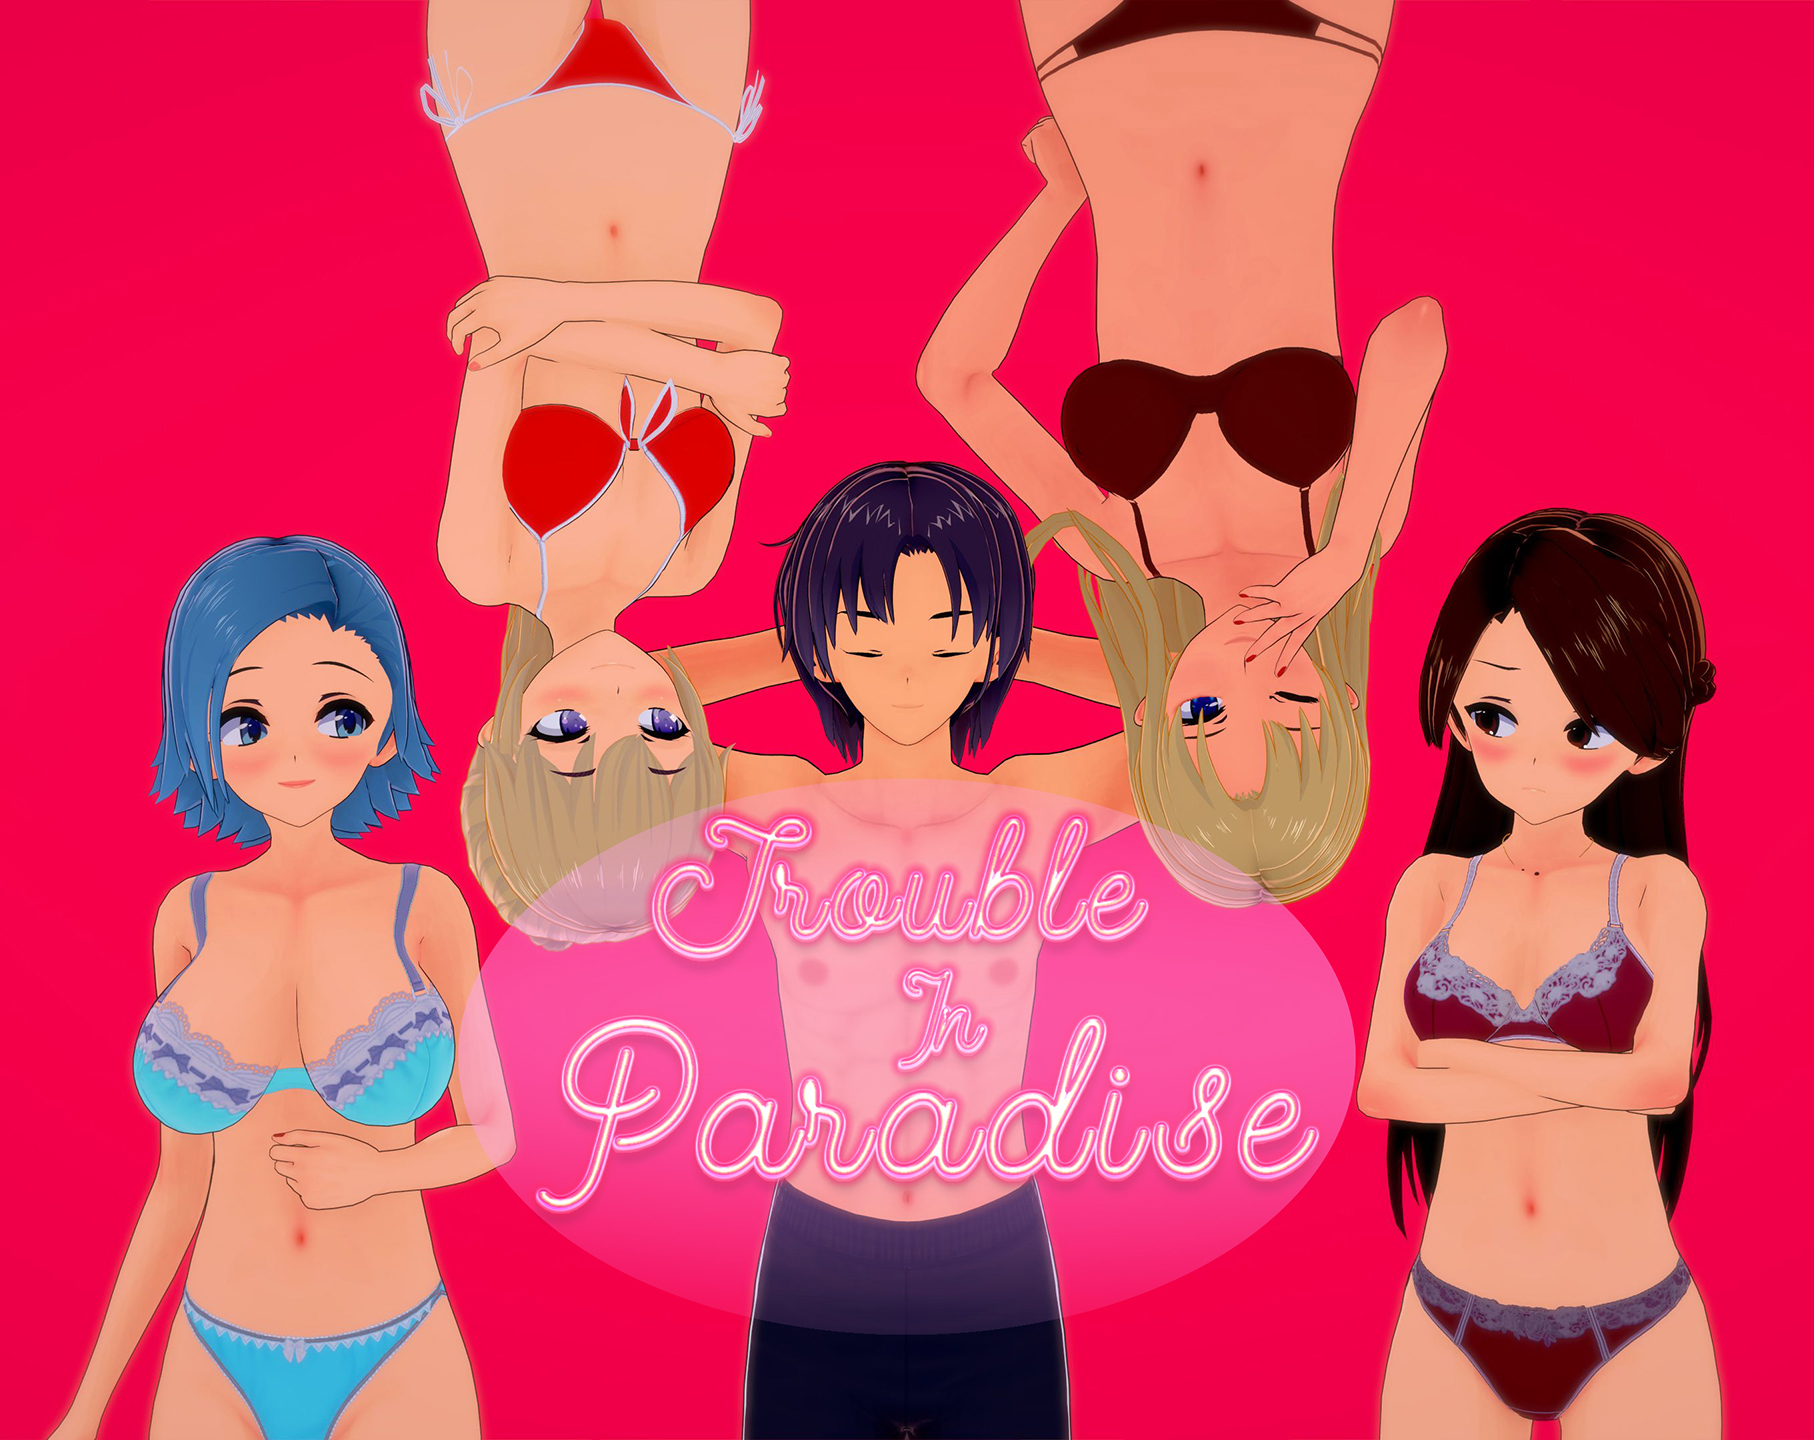 Trouble in paradise porn game